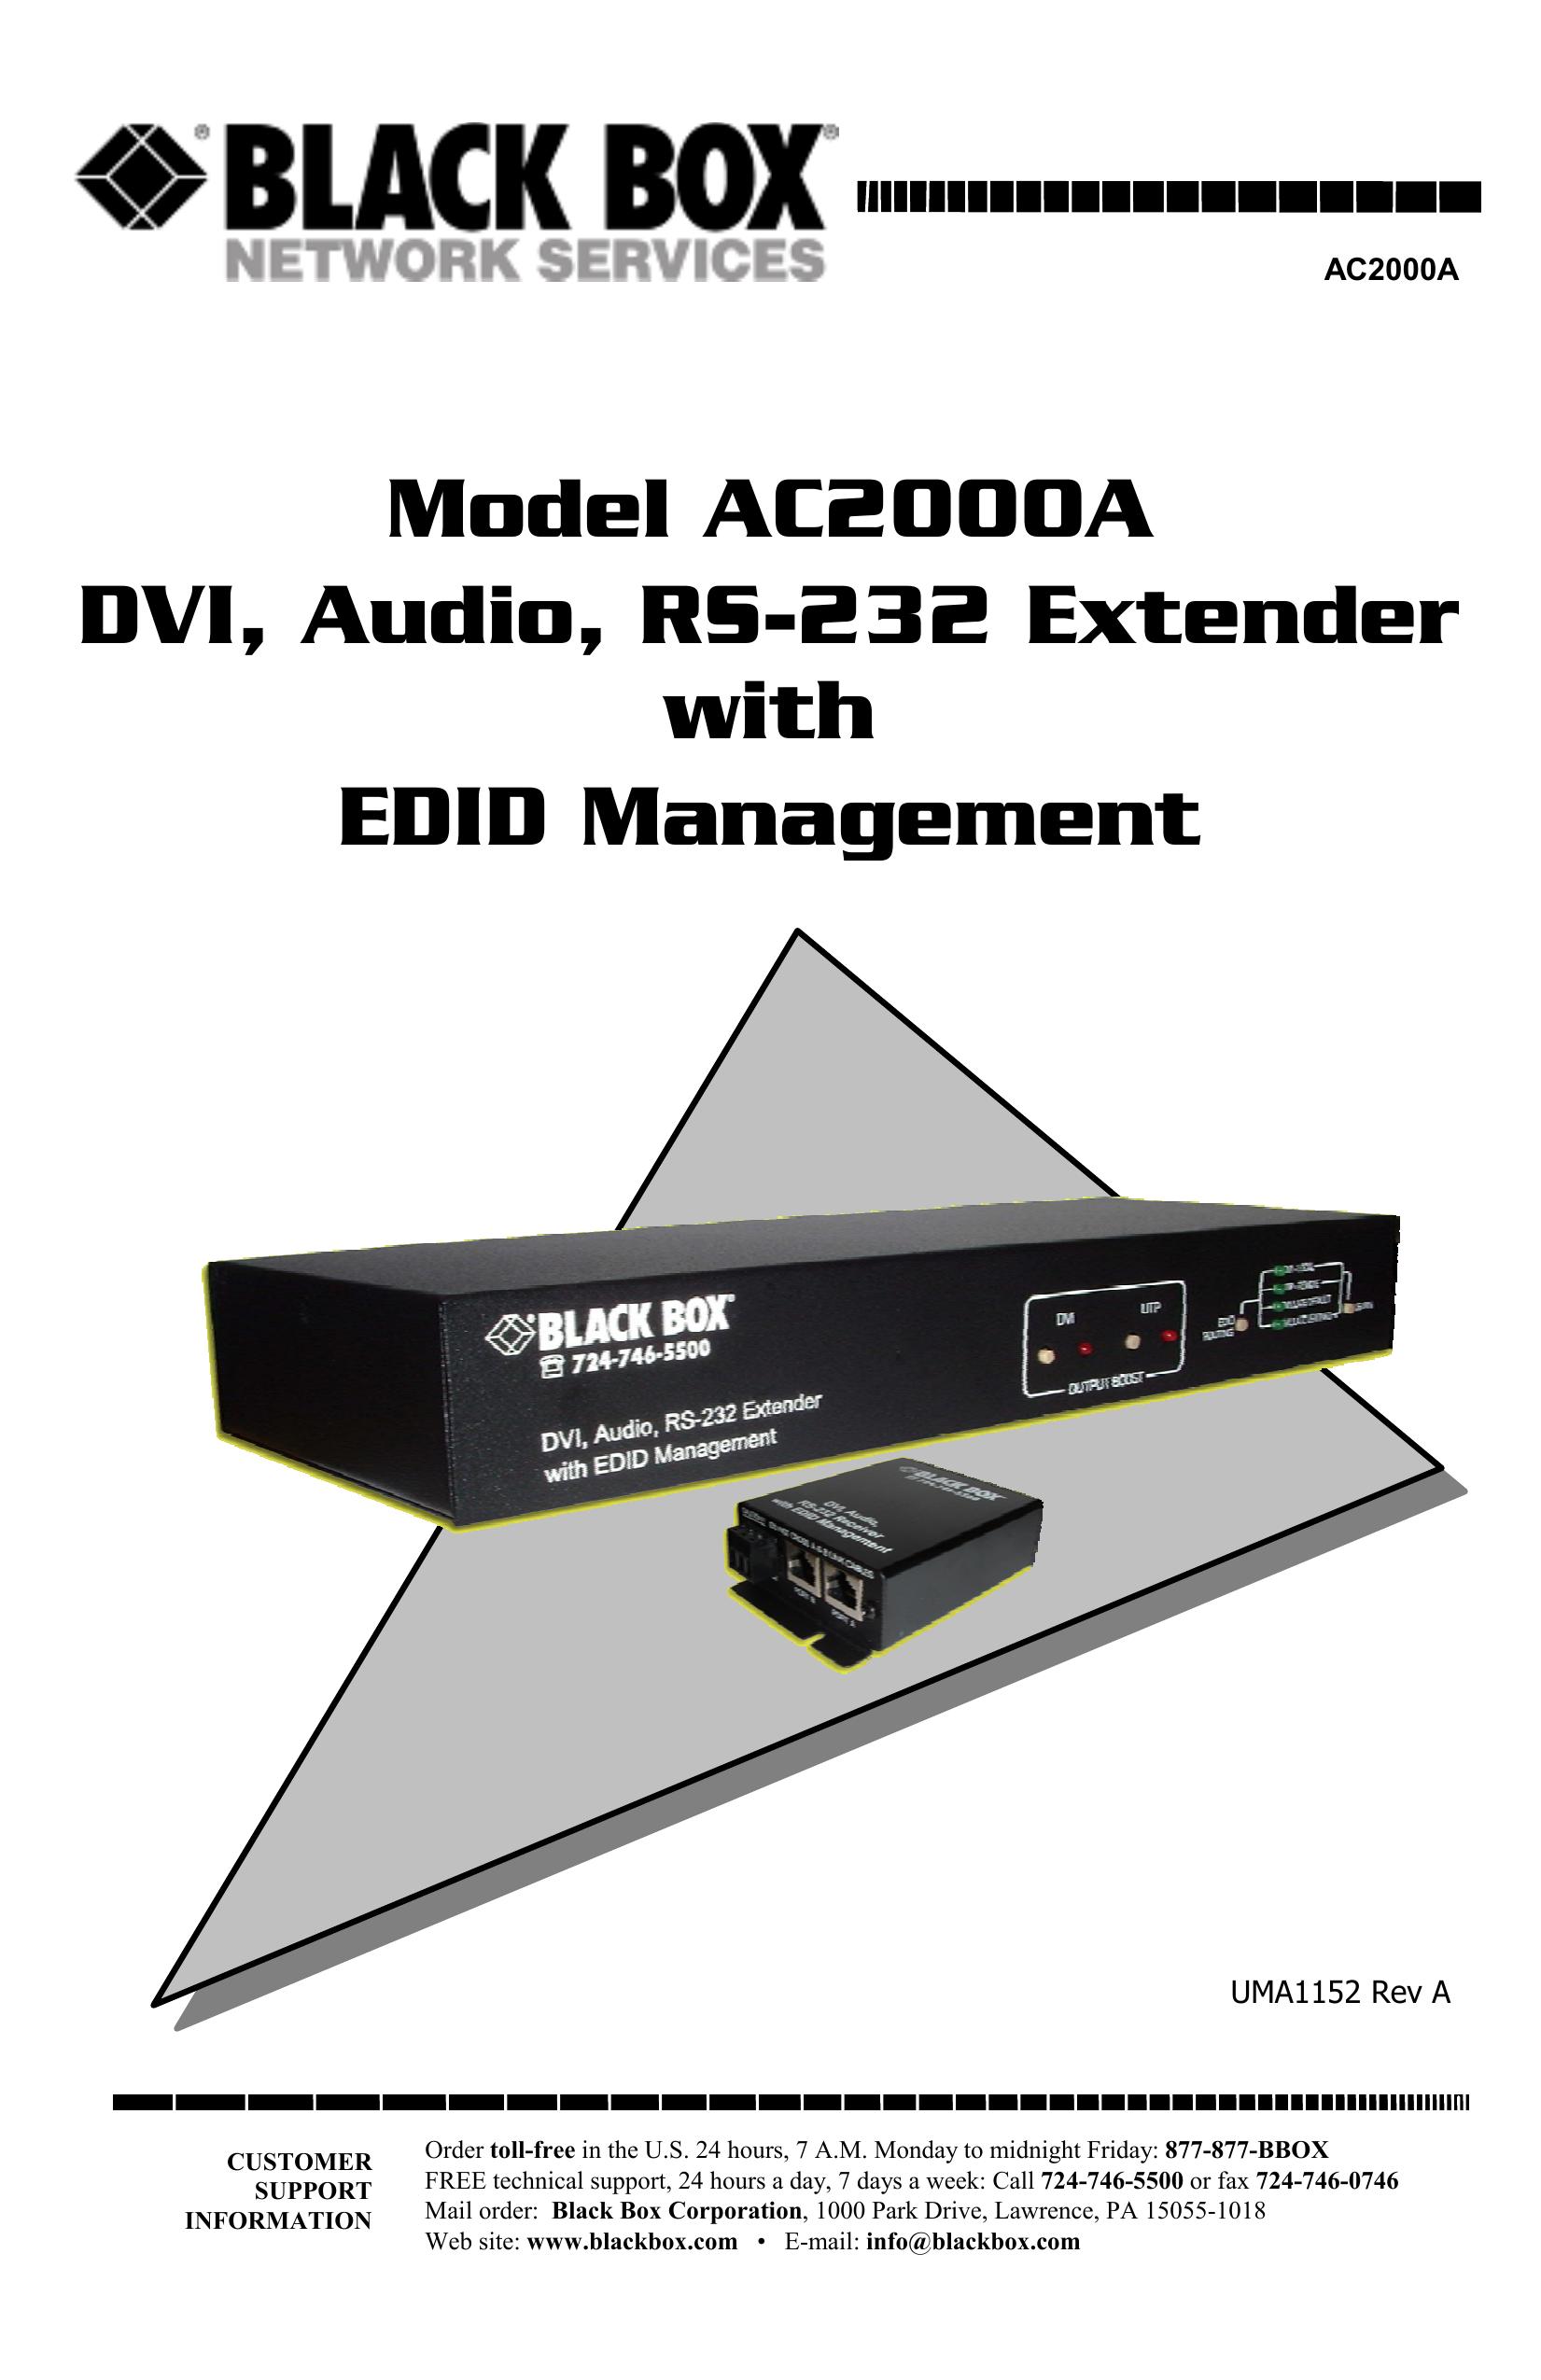 Black Box DVI, Audio, RS-232 Extender with EDID Management Musical Instrument Amplifier User Manual